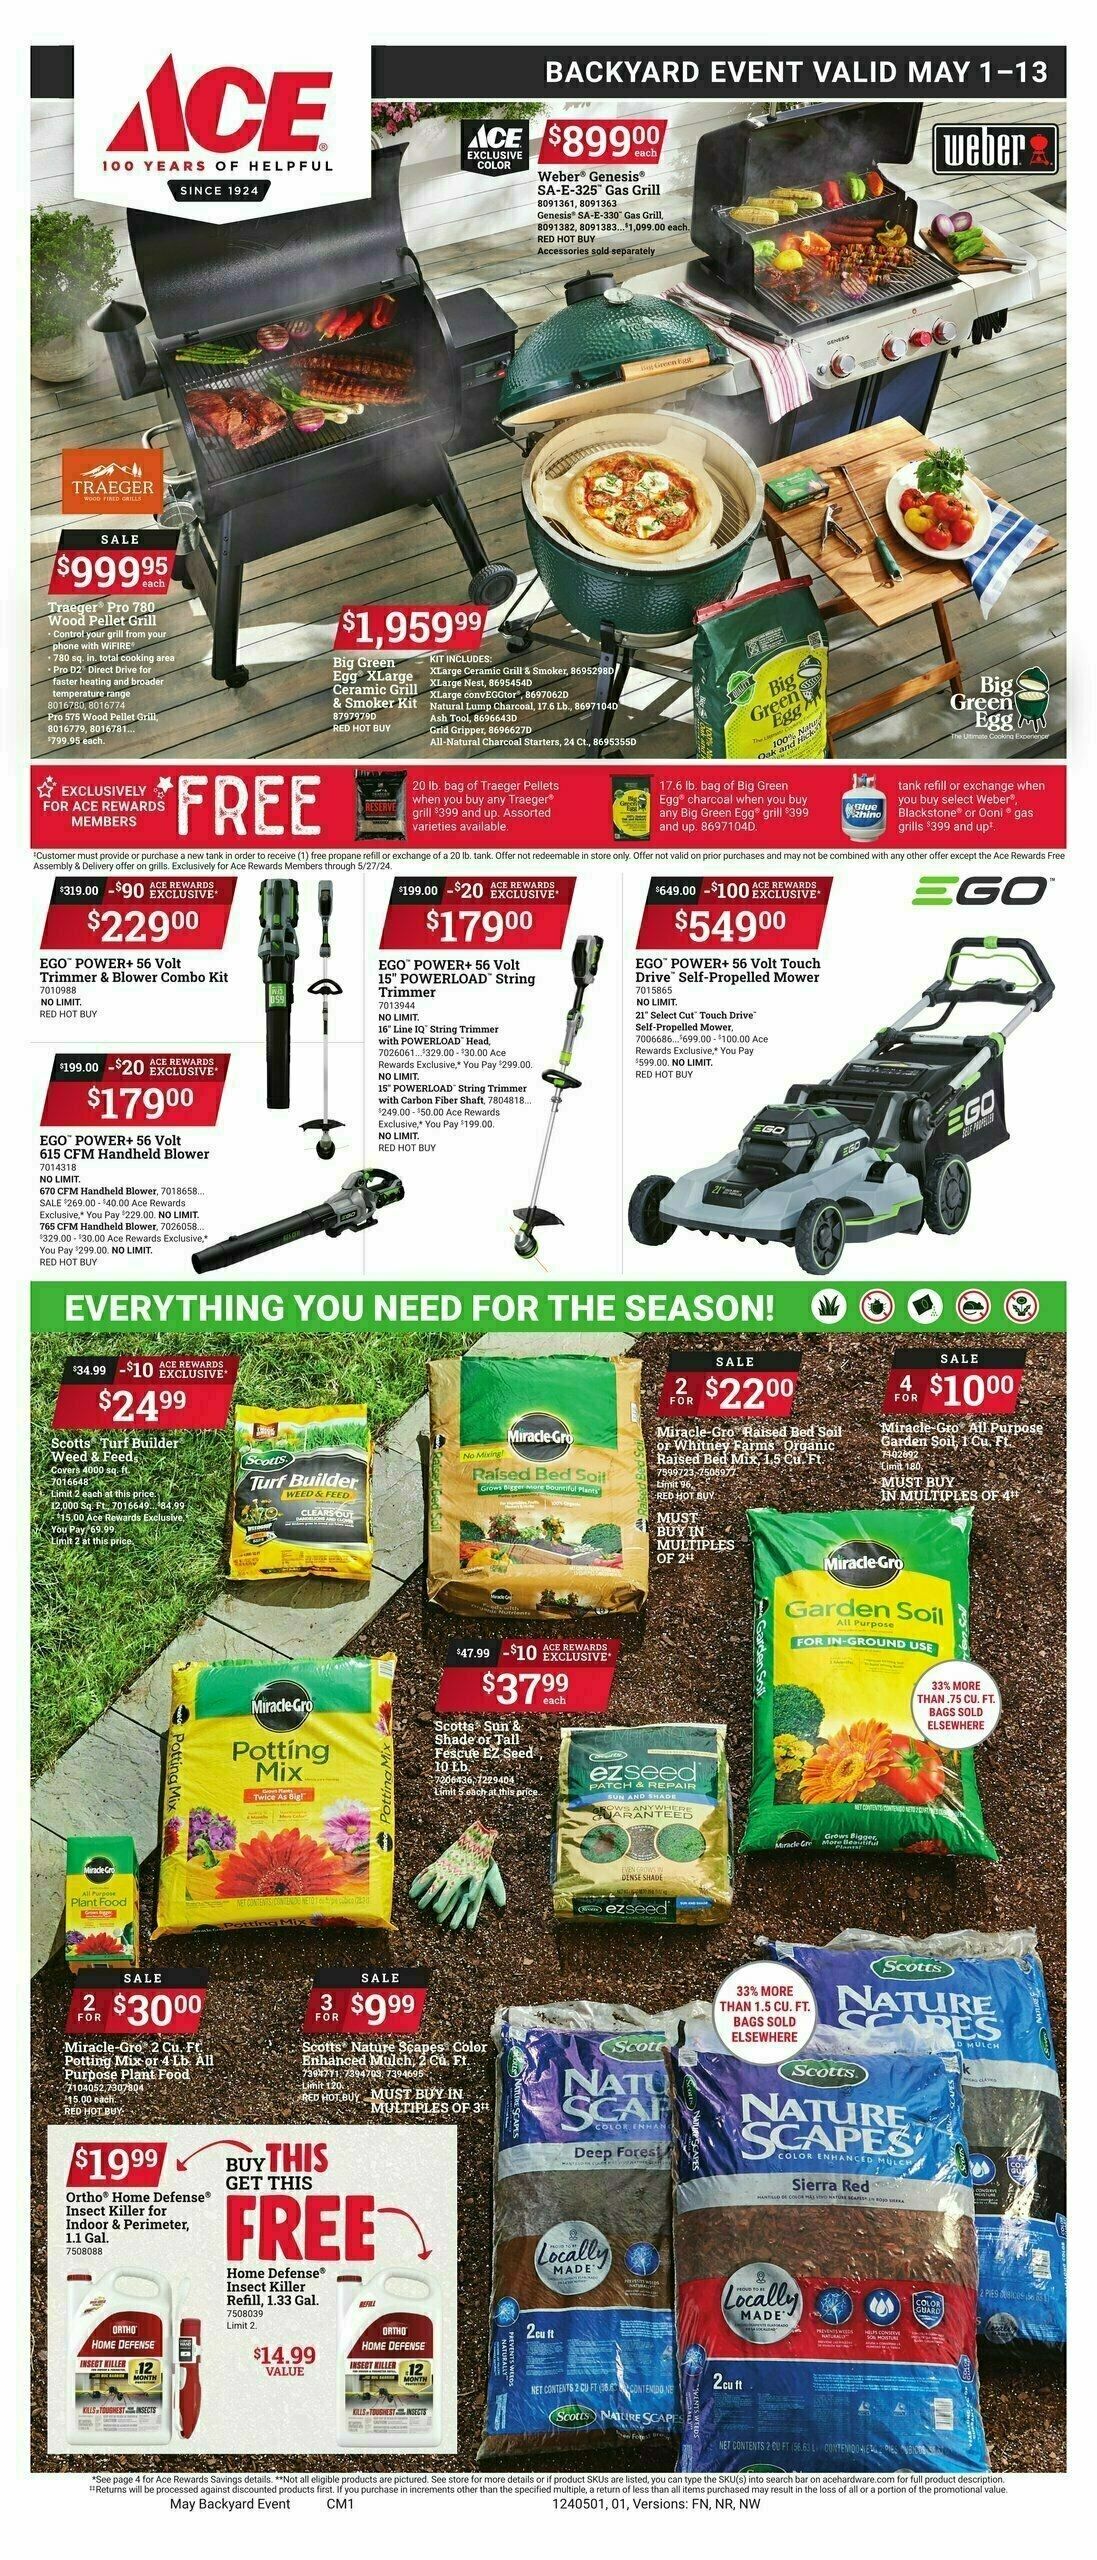 Ace Hardware Backyard Event Weekly Ad from May 1